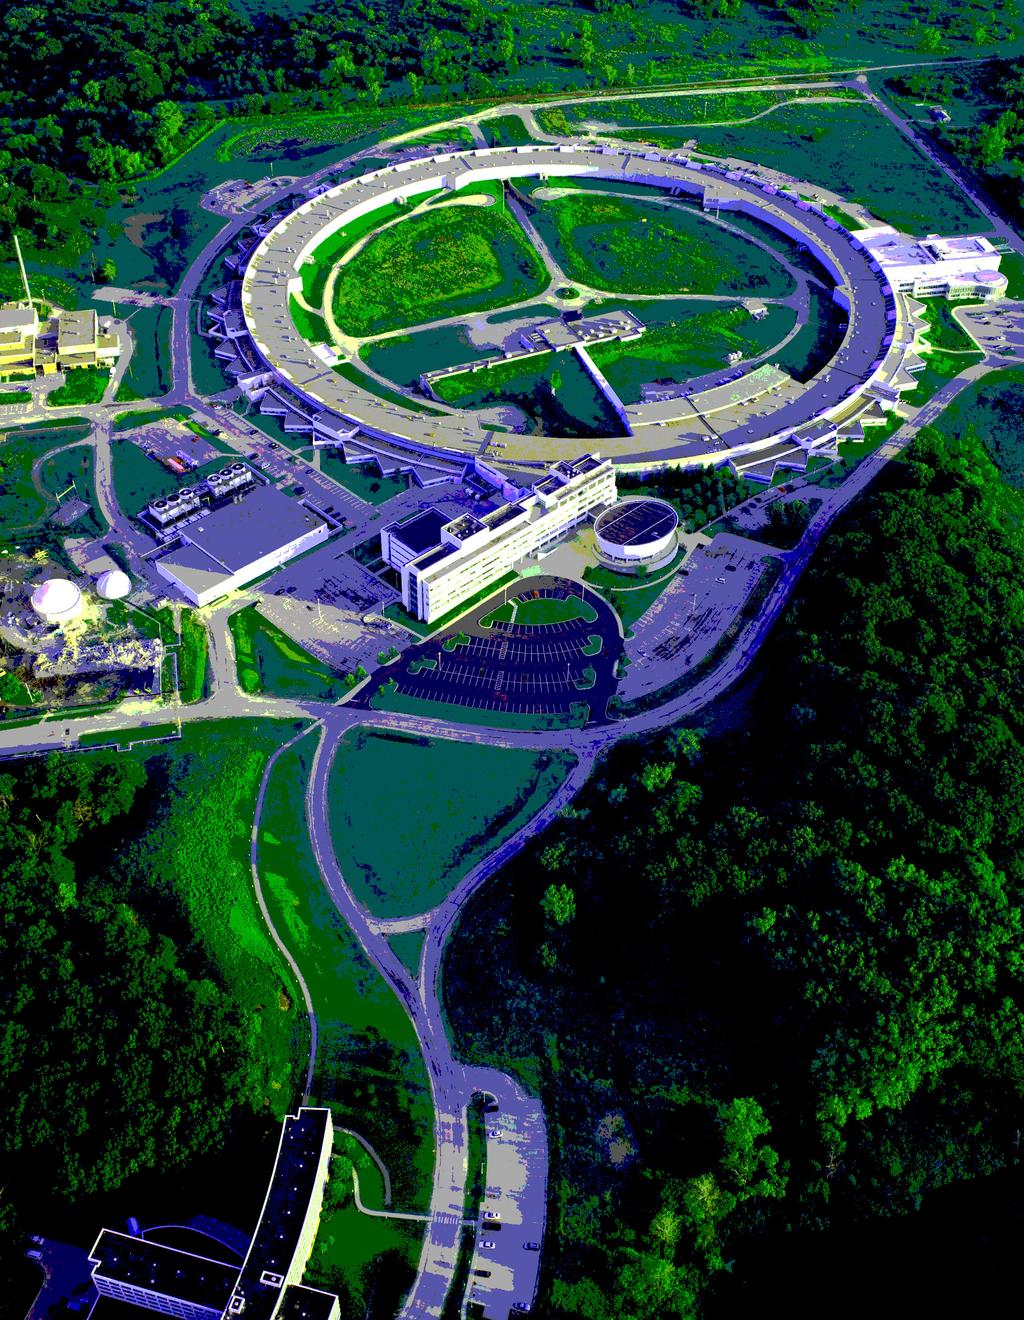 About Argonne National Laboratory The nation s first national laboratory, Argonne is the Midwest s largest federally funded R&D center, with about 3,200 employees.